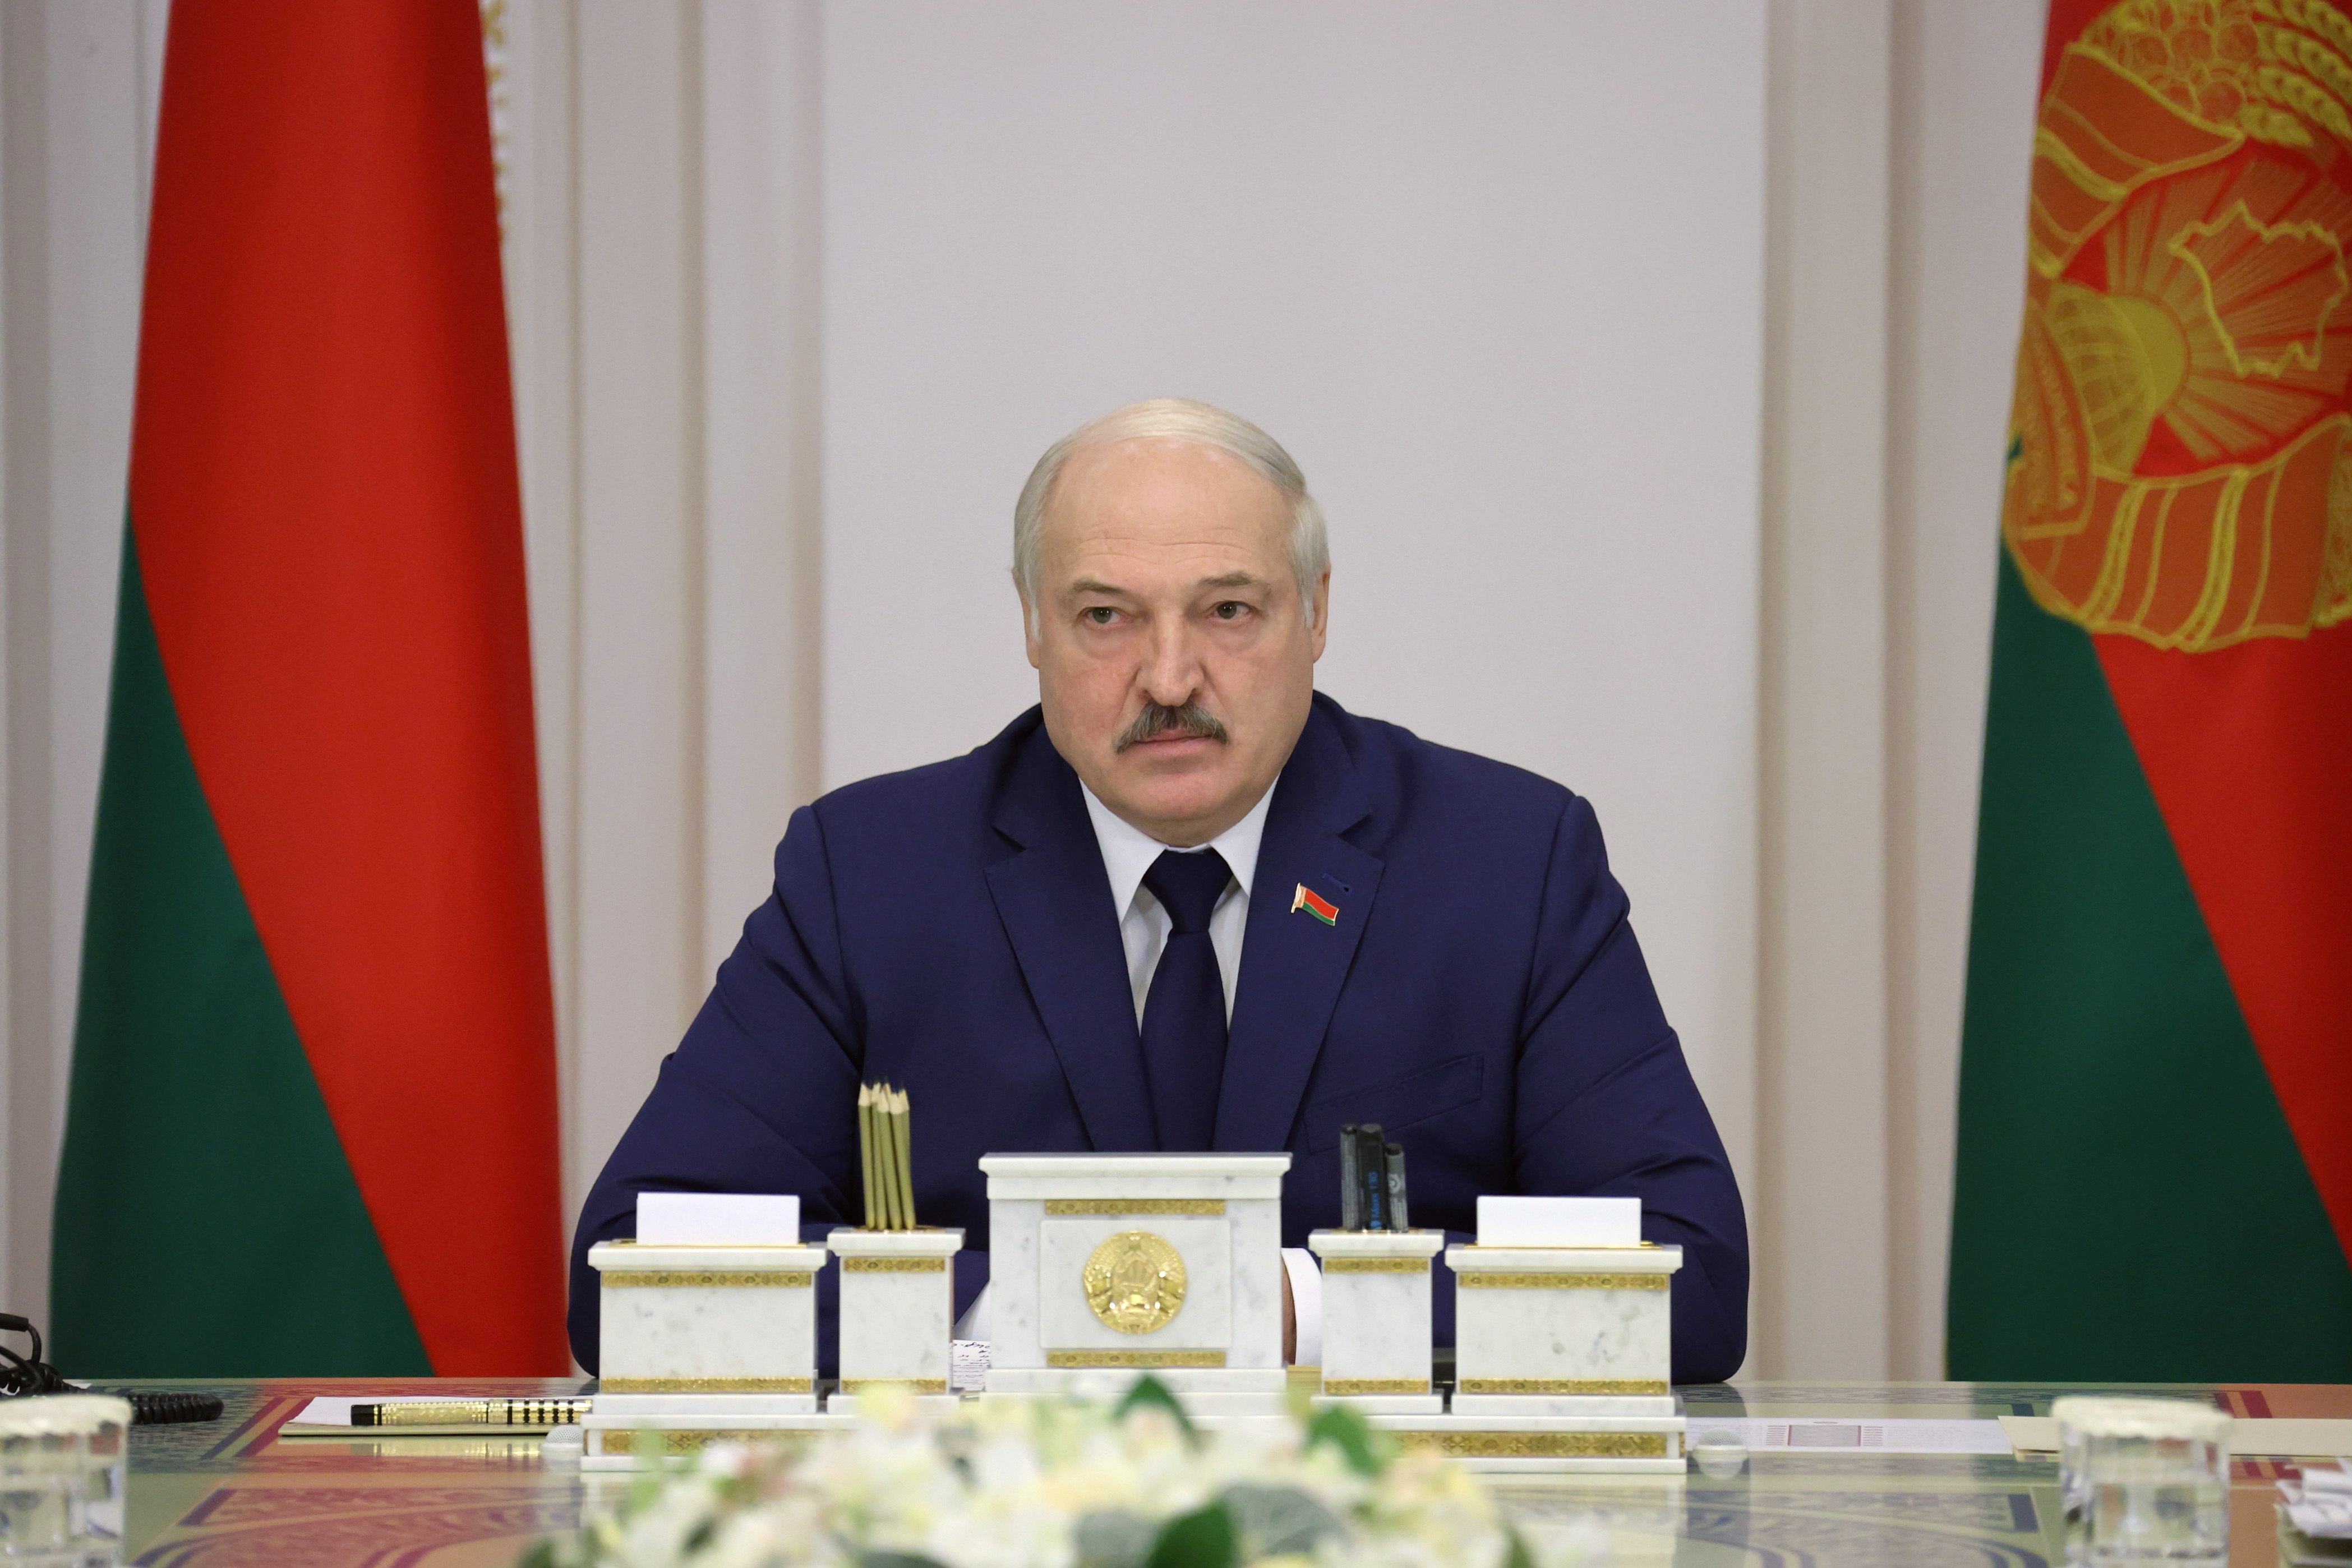 Belarusian President Alexander Lukashenko chairs a meeting with the leadership of the Council of Ministers in Minsk, Belarus November 11, 2021. Nikolai Petrov/BelTA/Handout via REUTERS